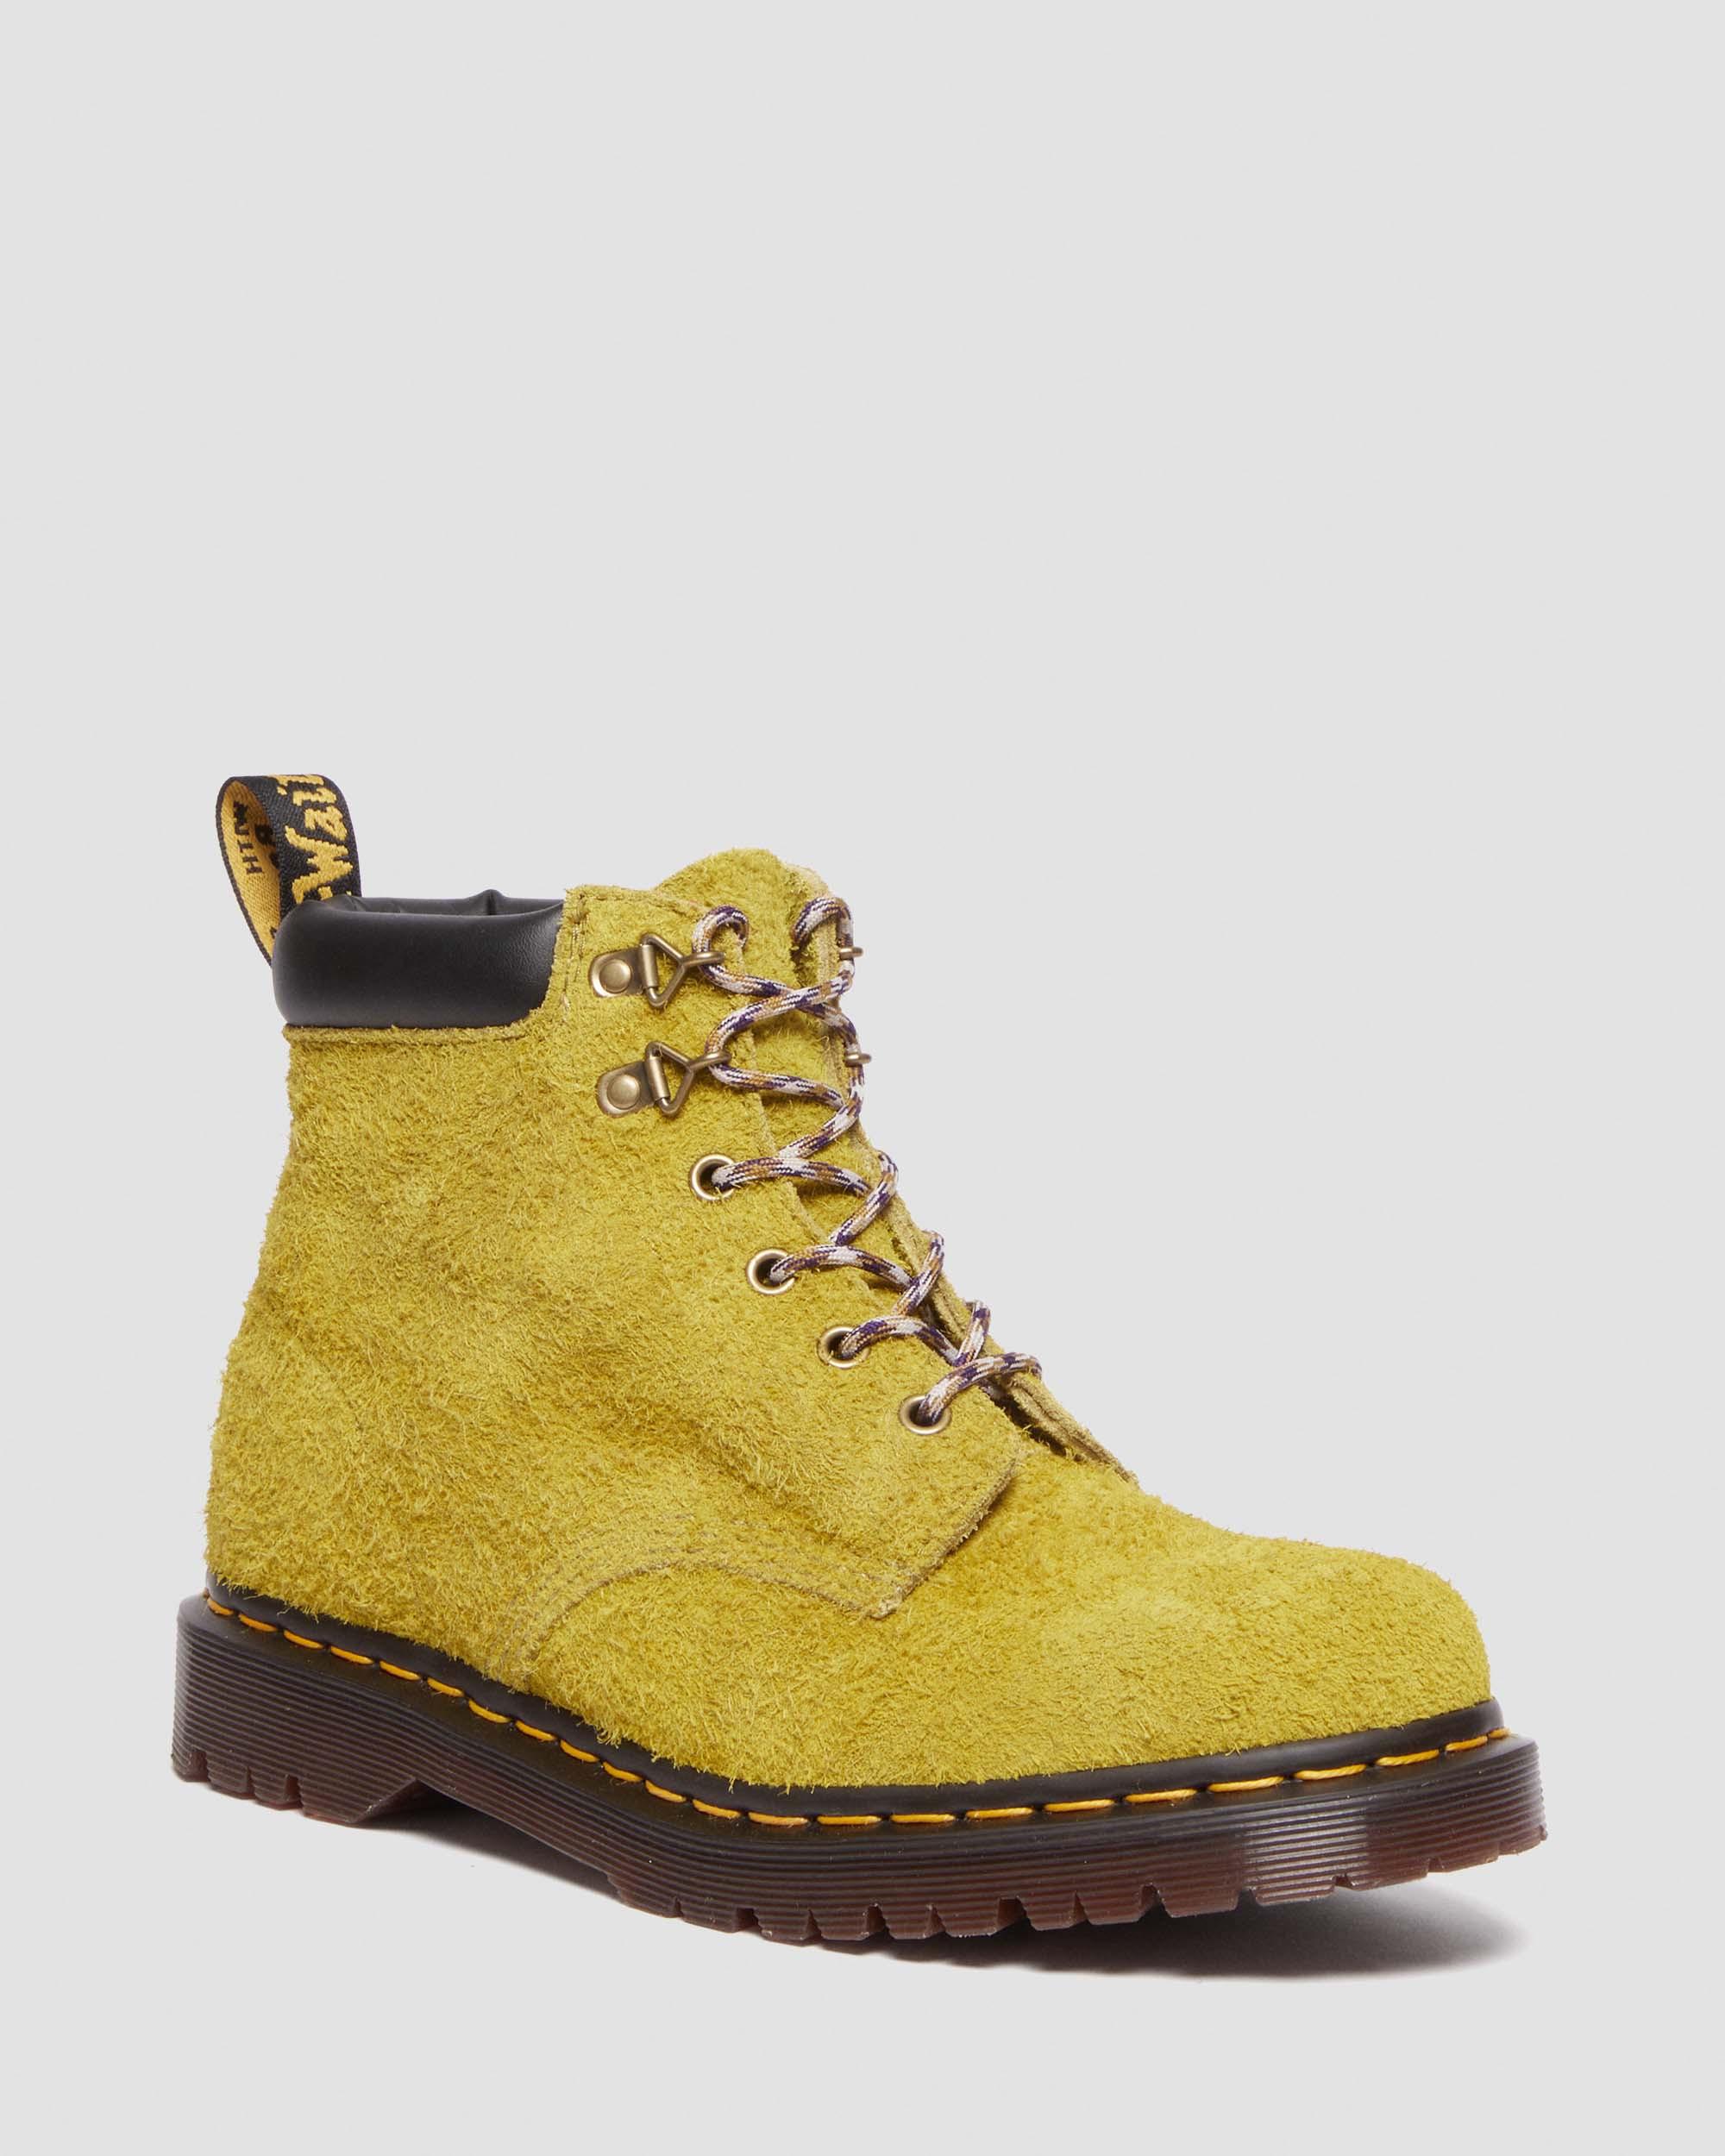 Hiker Style Boots | Dr. Martens